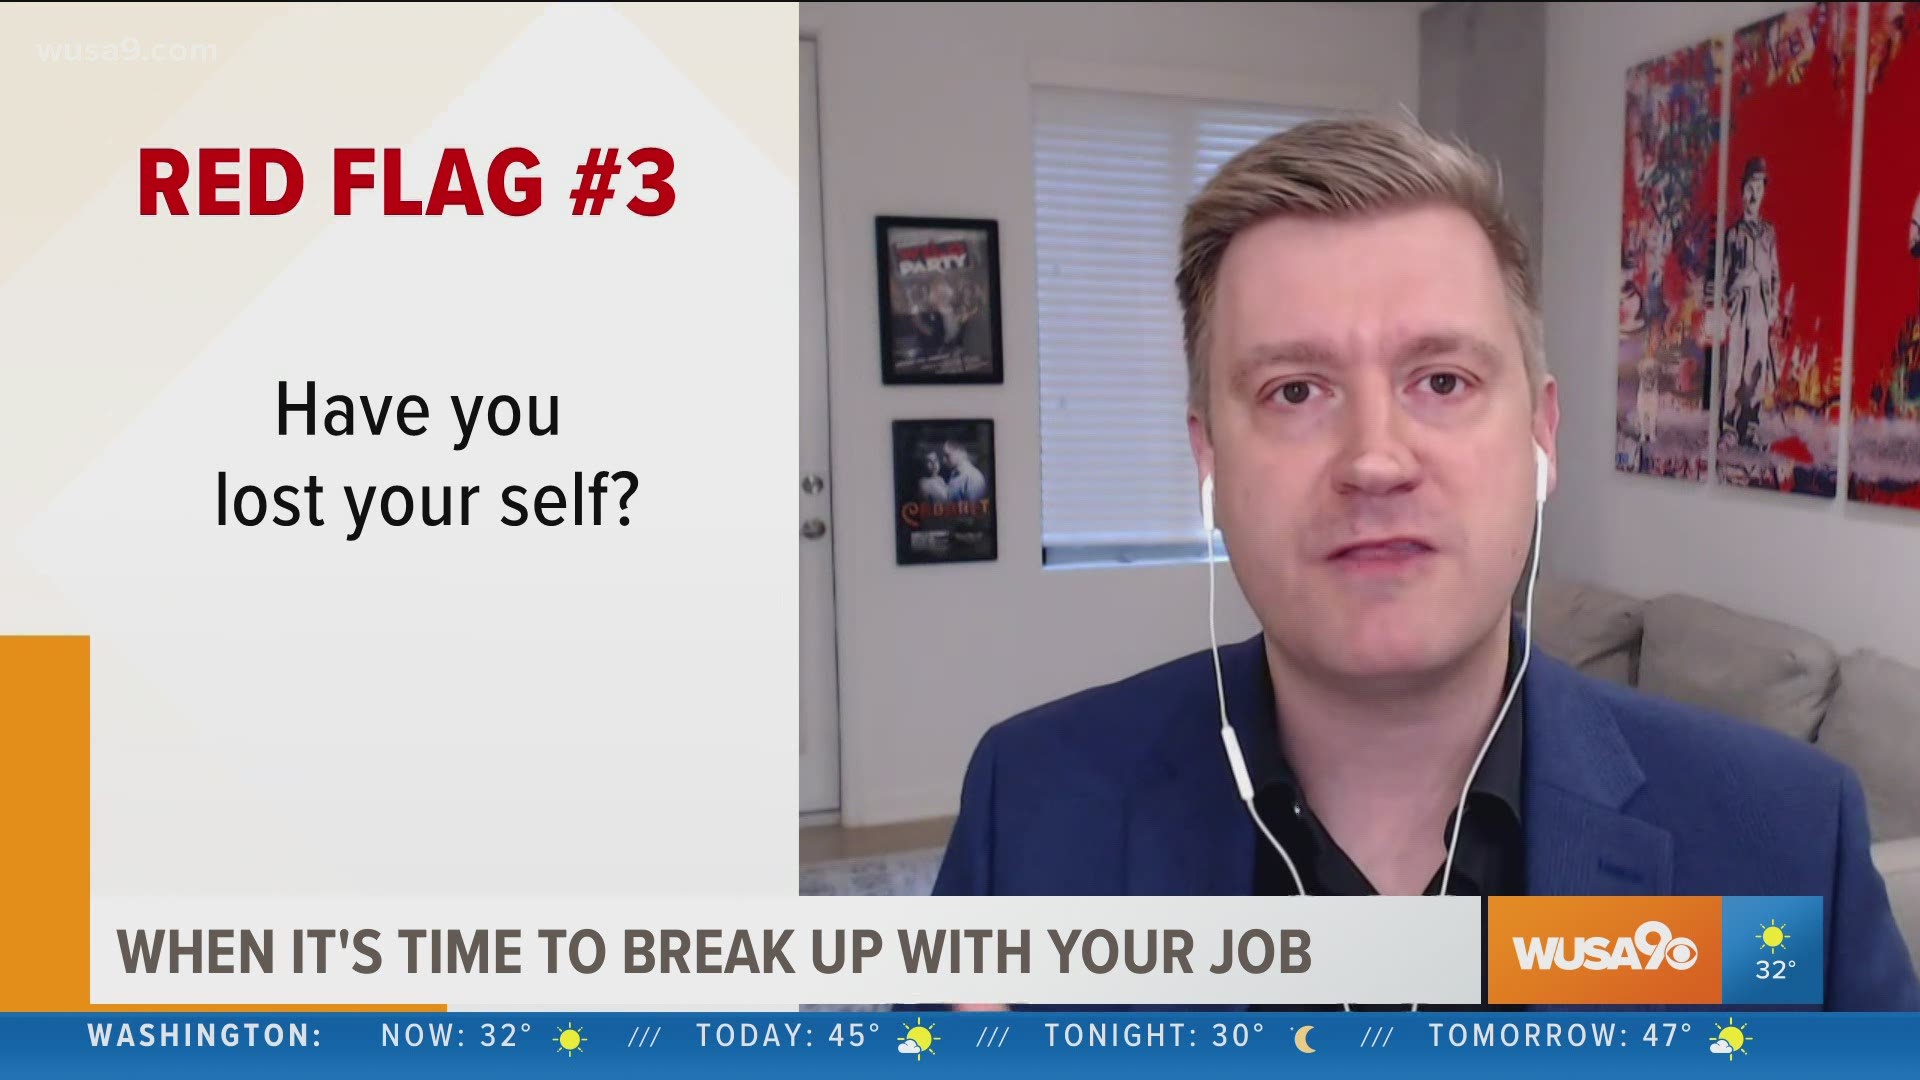 Career coach Dan Mason shares the red flags that pop up when it's time to find a new job.